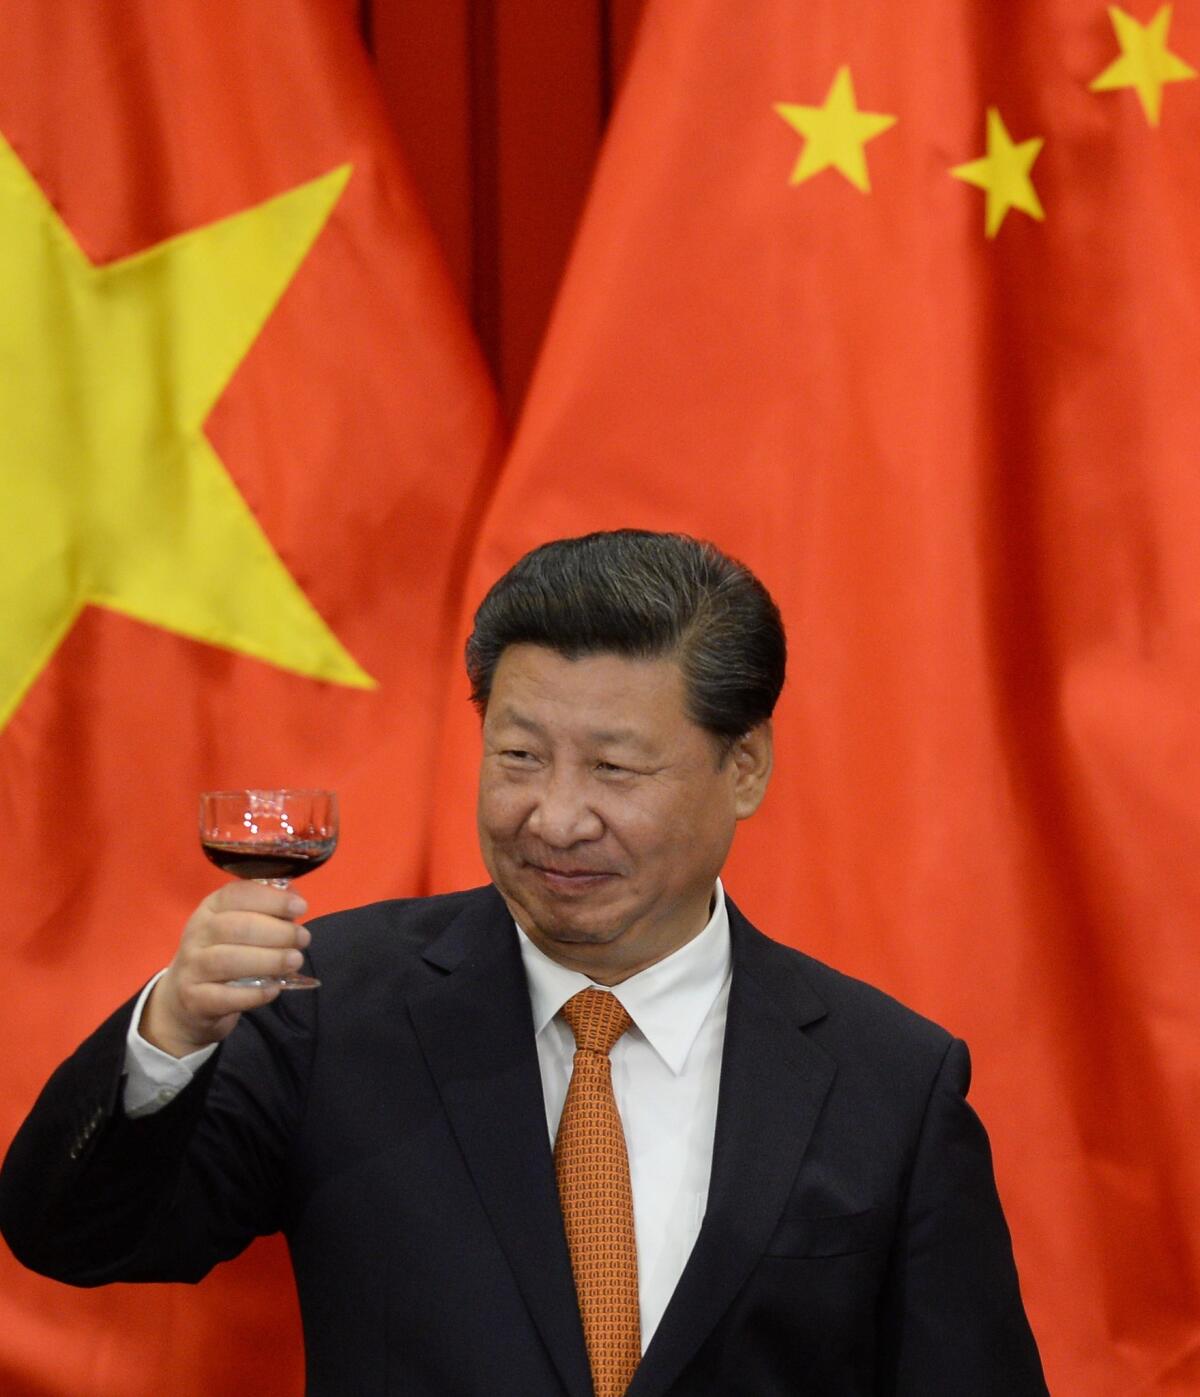 Chinese President Xi Jinping raises a toast with Vietnamese officials in Hanoi on Nov. 5.